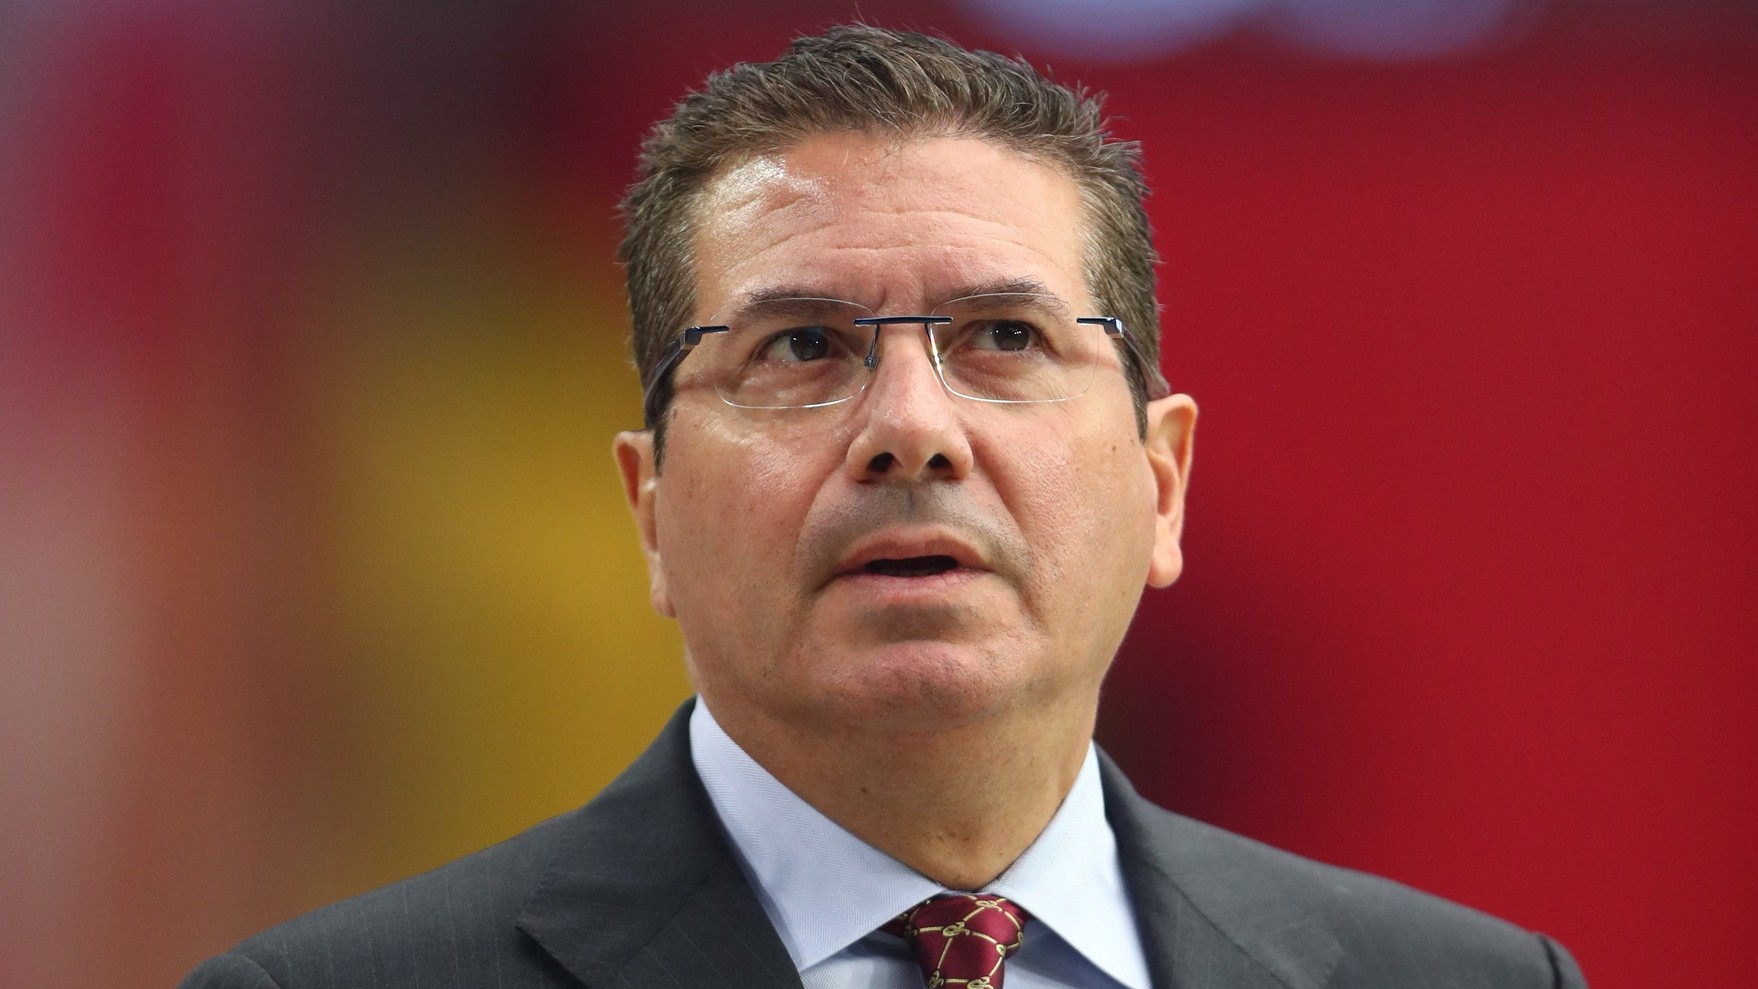 Report: Dan Snyder Calls Latest Sexual Misconduct Allegations ‘Meritless'